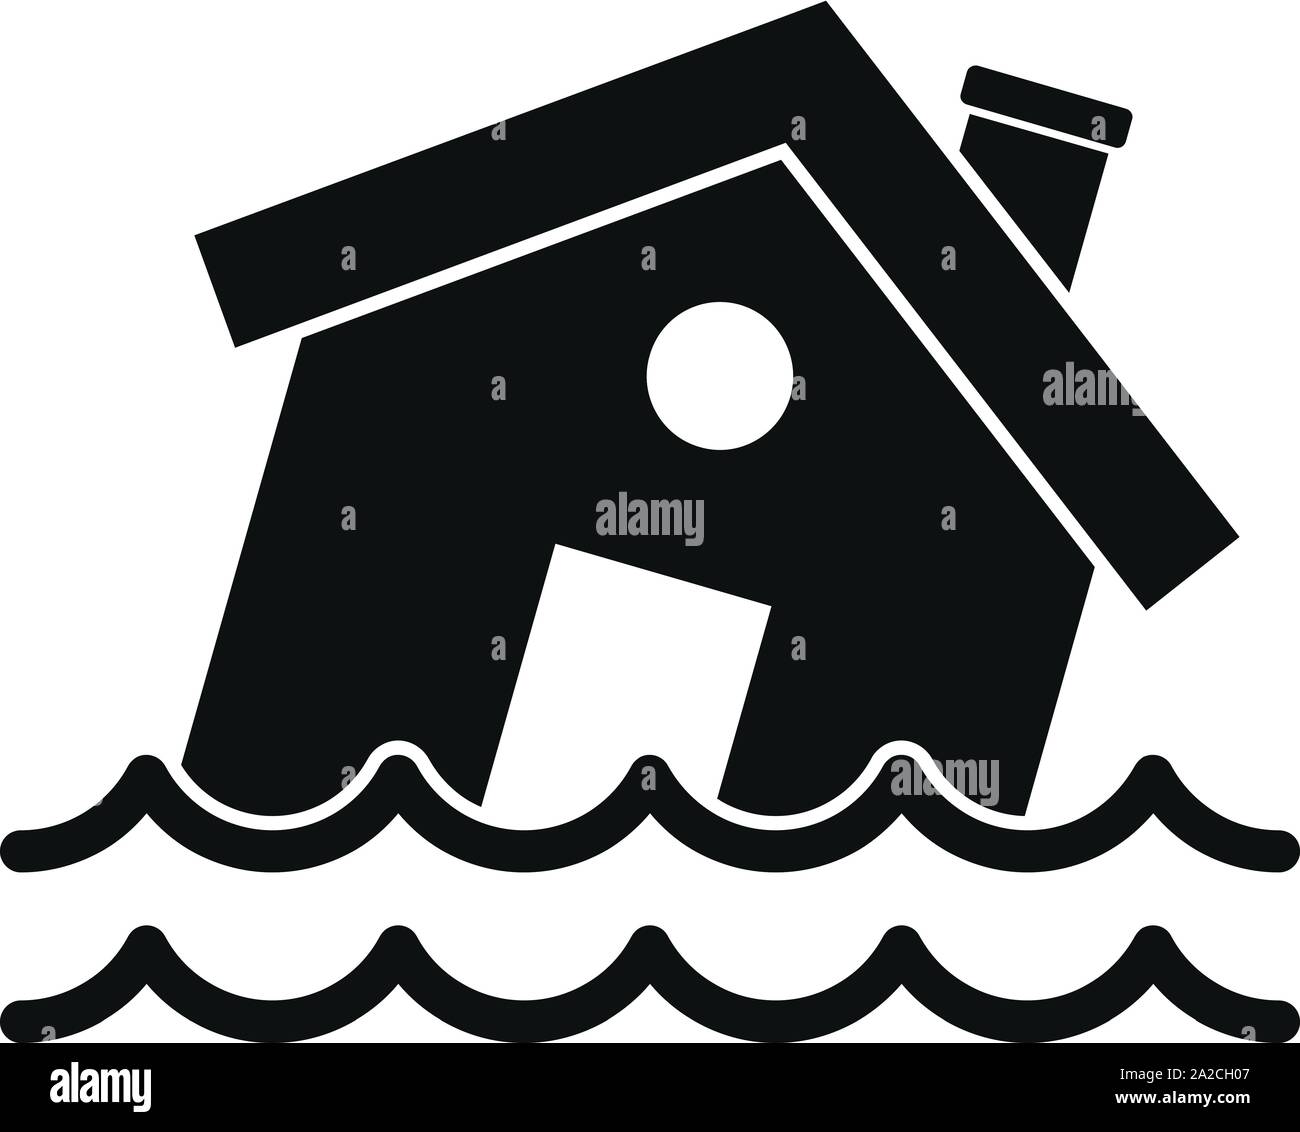 Flood destroy house icon. Simple illustration of flood destroy house vector icon for web design isolated on white background Stock Vector